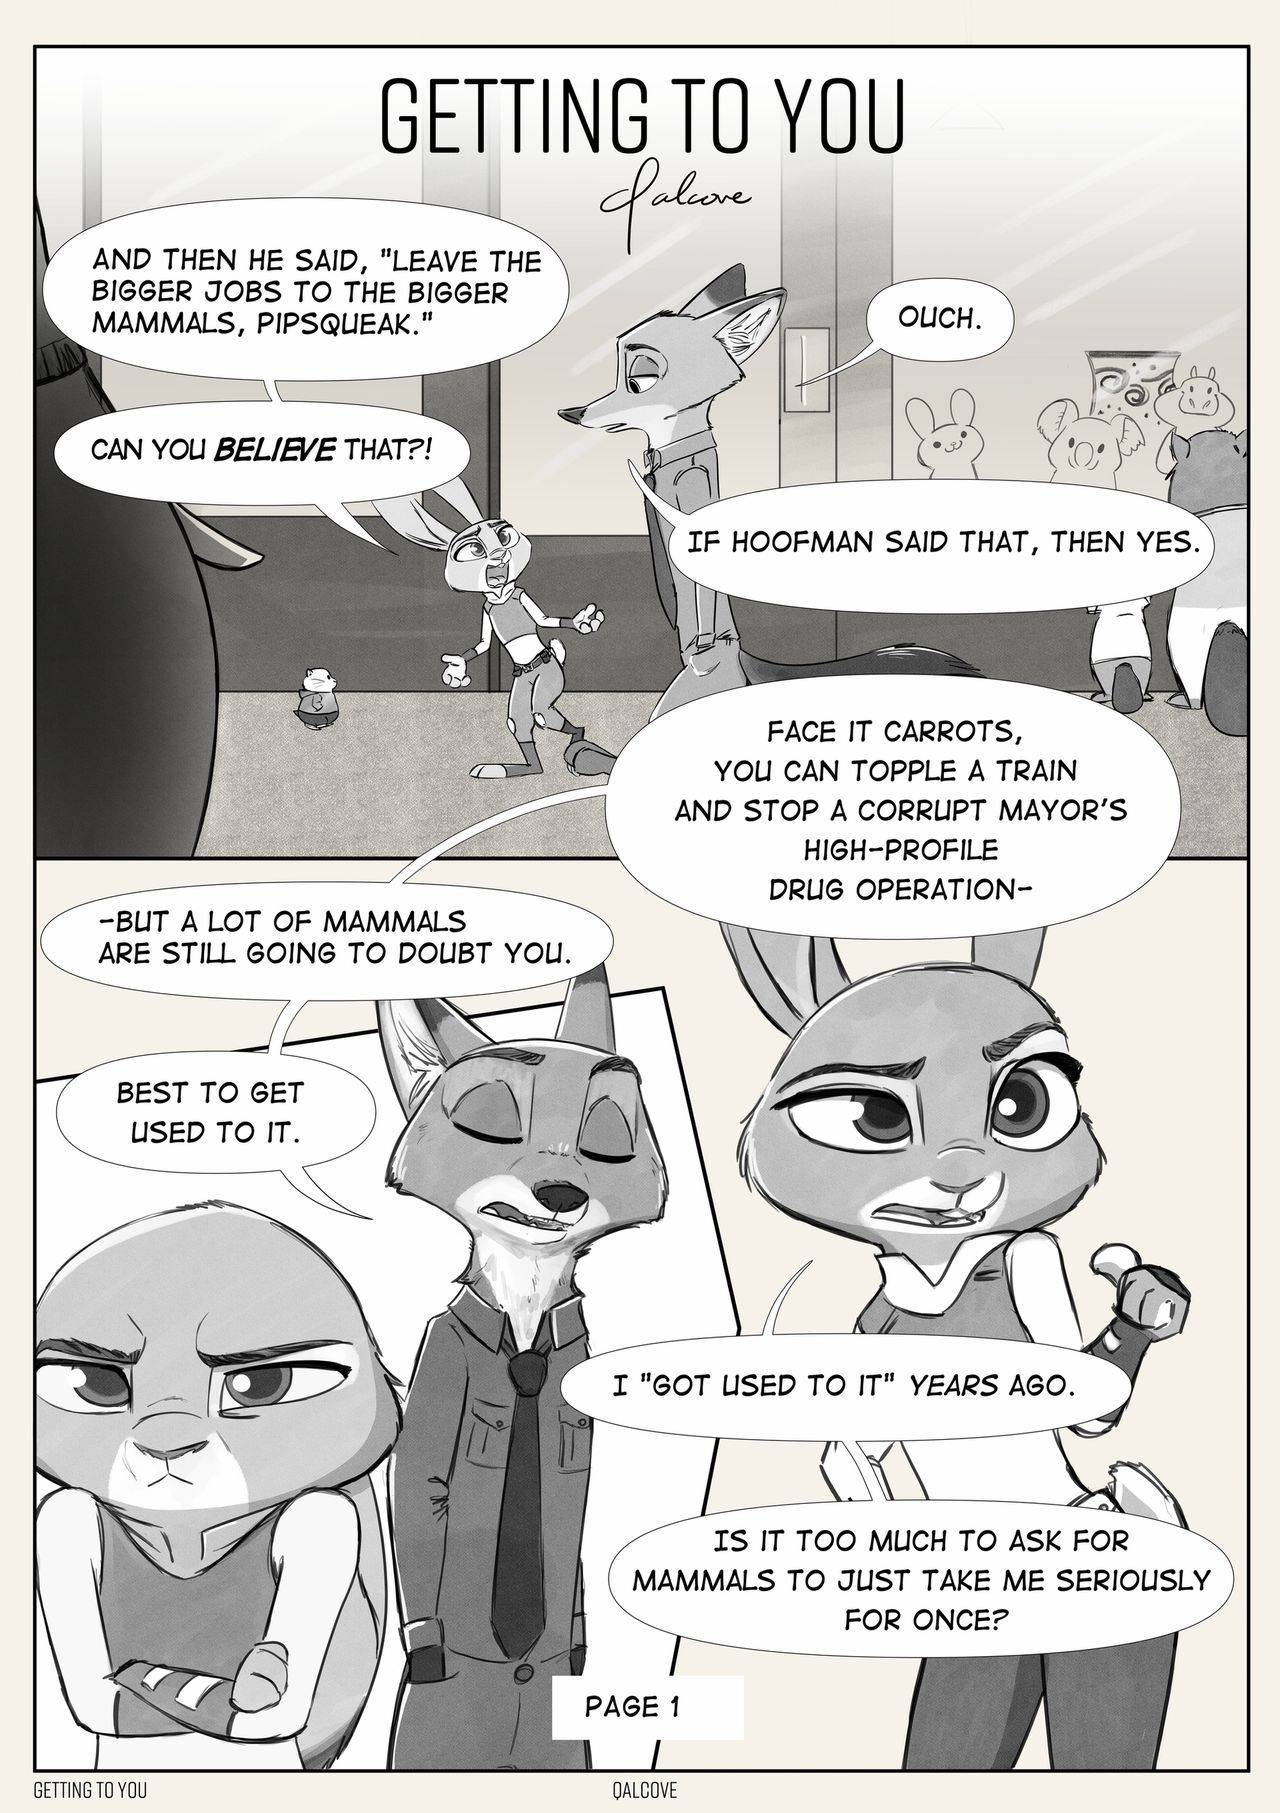 [Qalcove] Getting To You (Zootopia) Ongoing 1